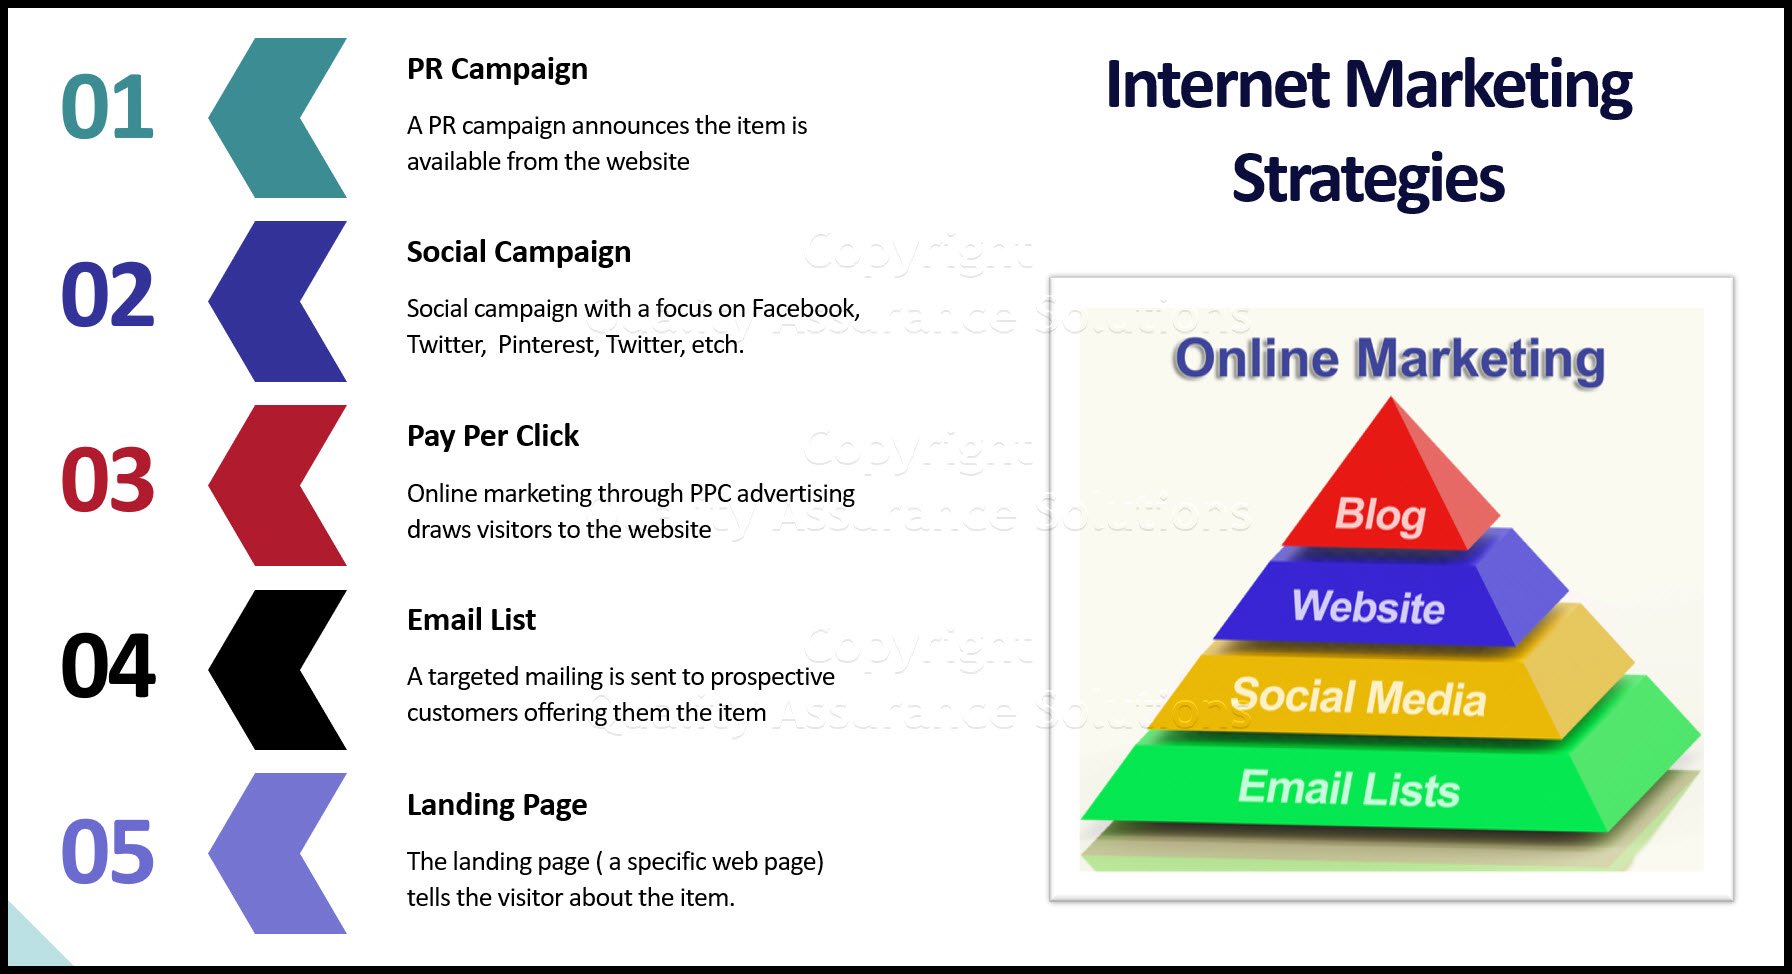 Internet marketing maximizing strategy, means combining all the marketing strategies types together.